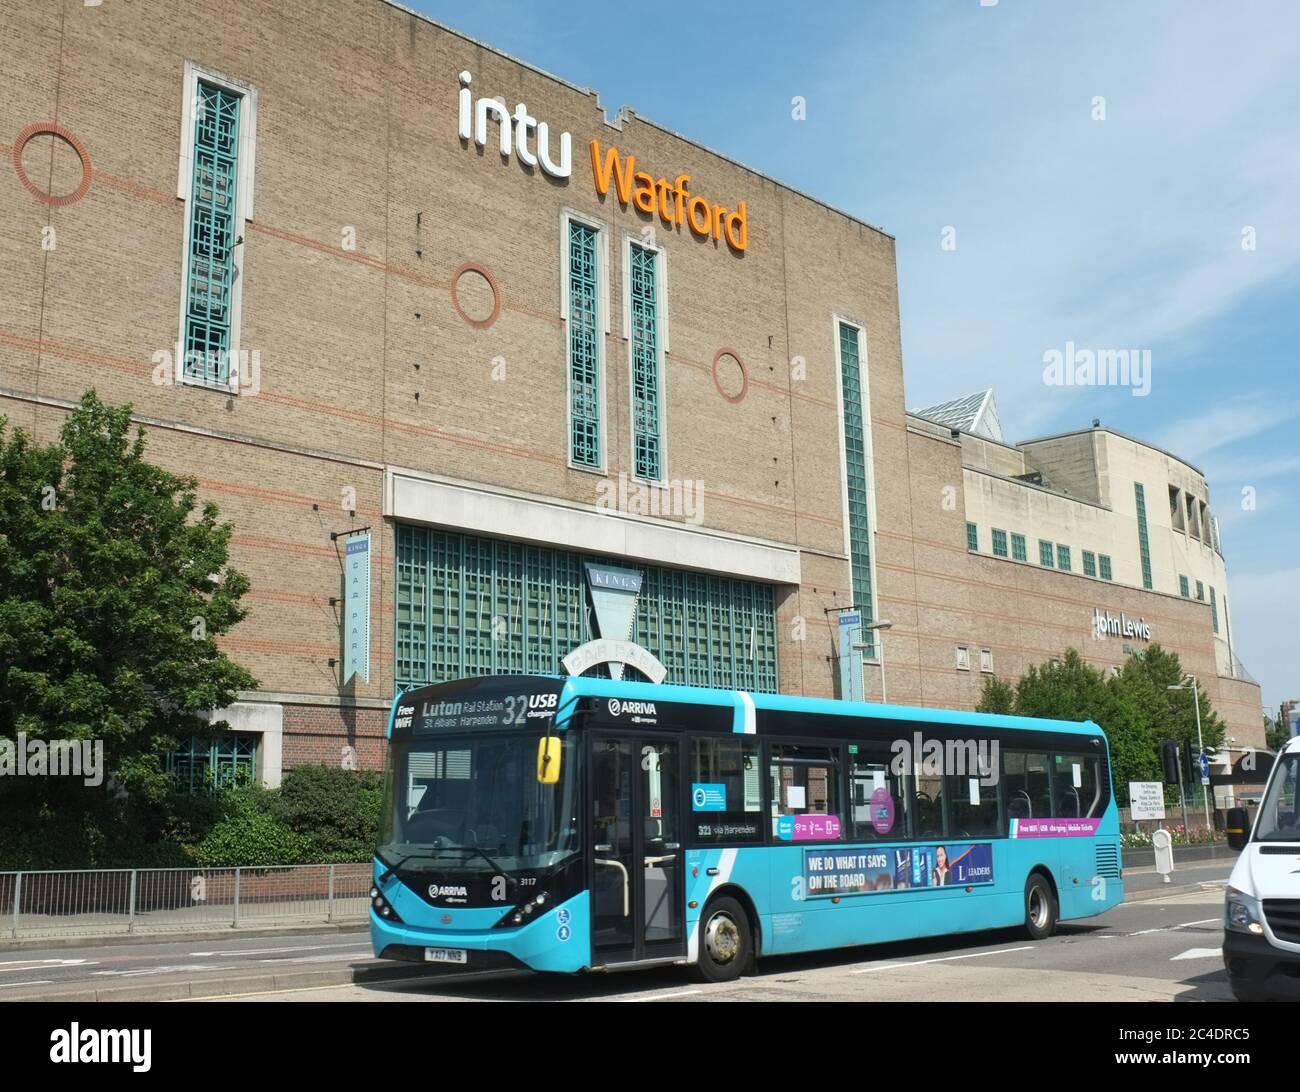 INTU shopping centre in Watford Hertfordshire, UK, Shopping centre giant Intu on brink of administration, 26TH JUNE 2020 Stock Photo